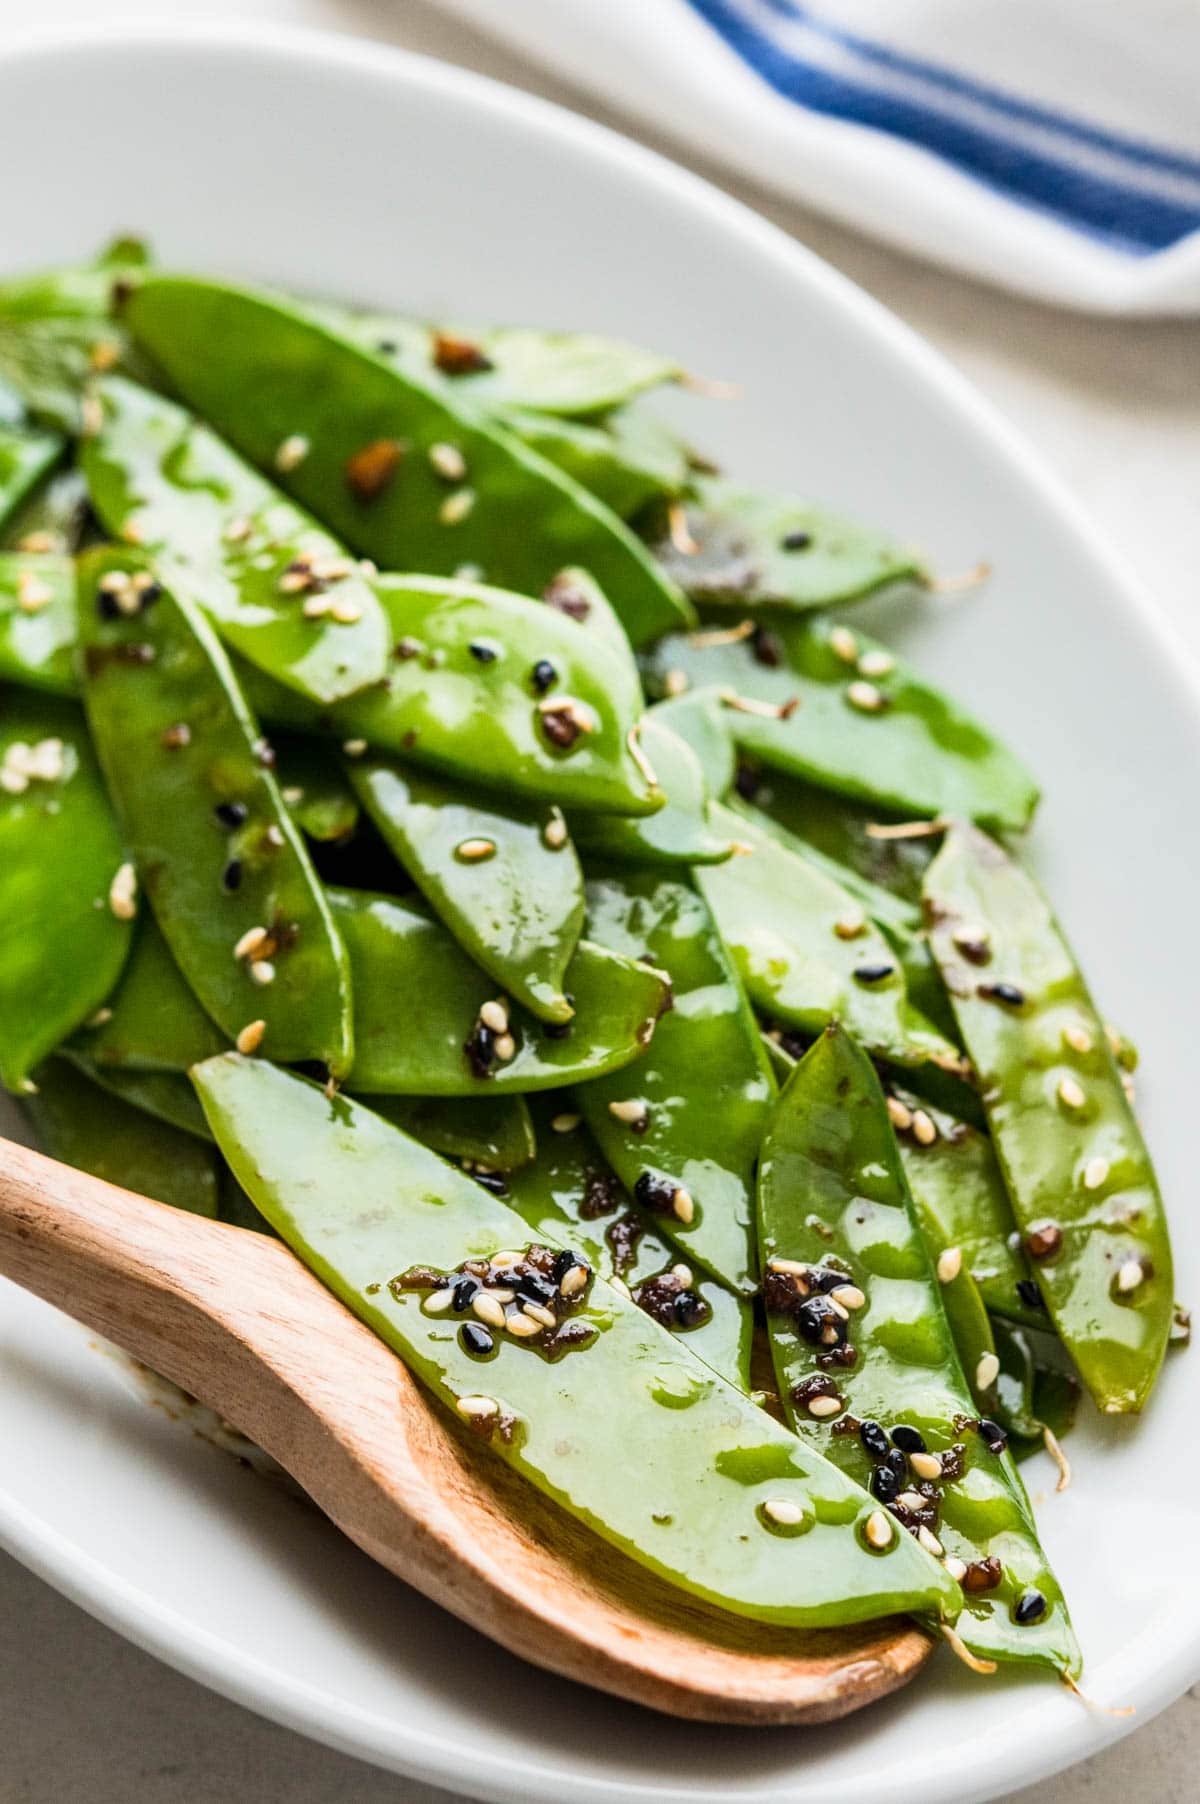 Serving cooked snow peas with sesame seeds.